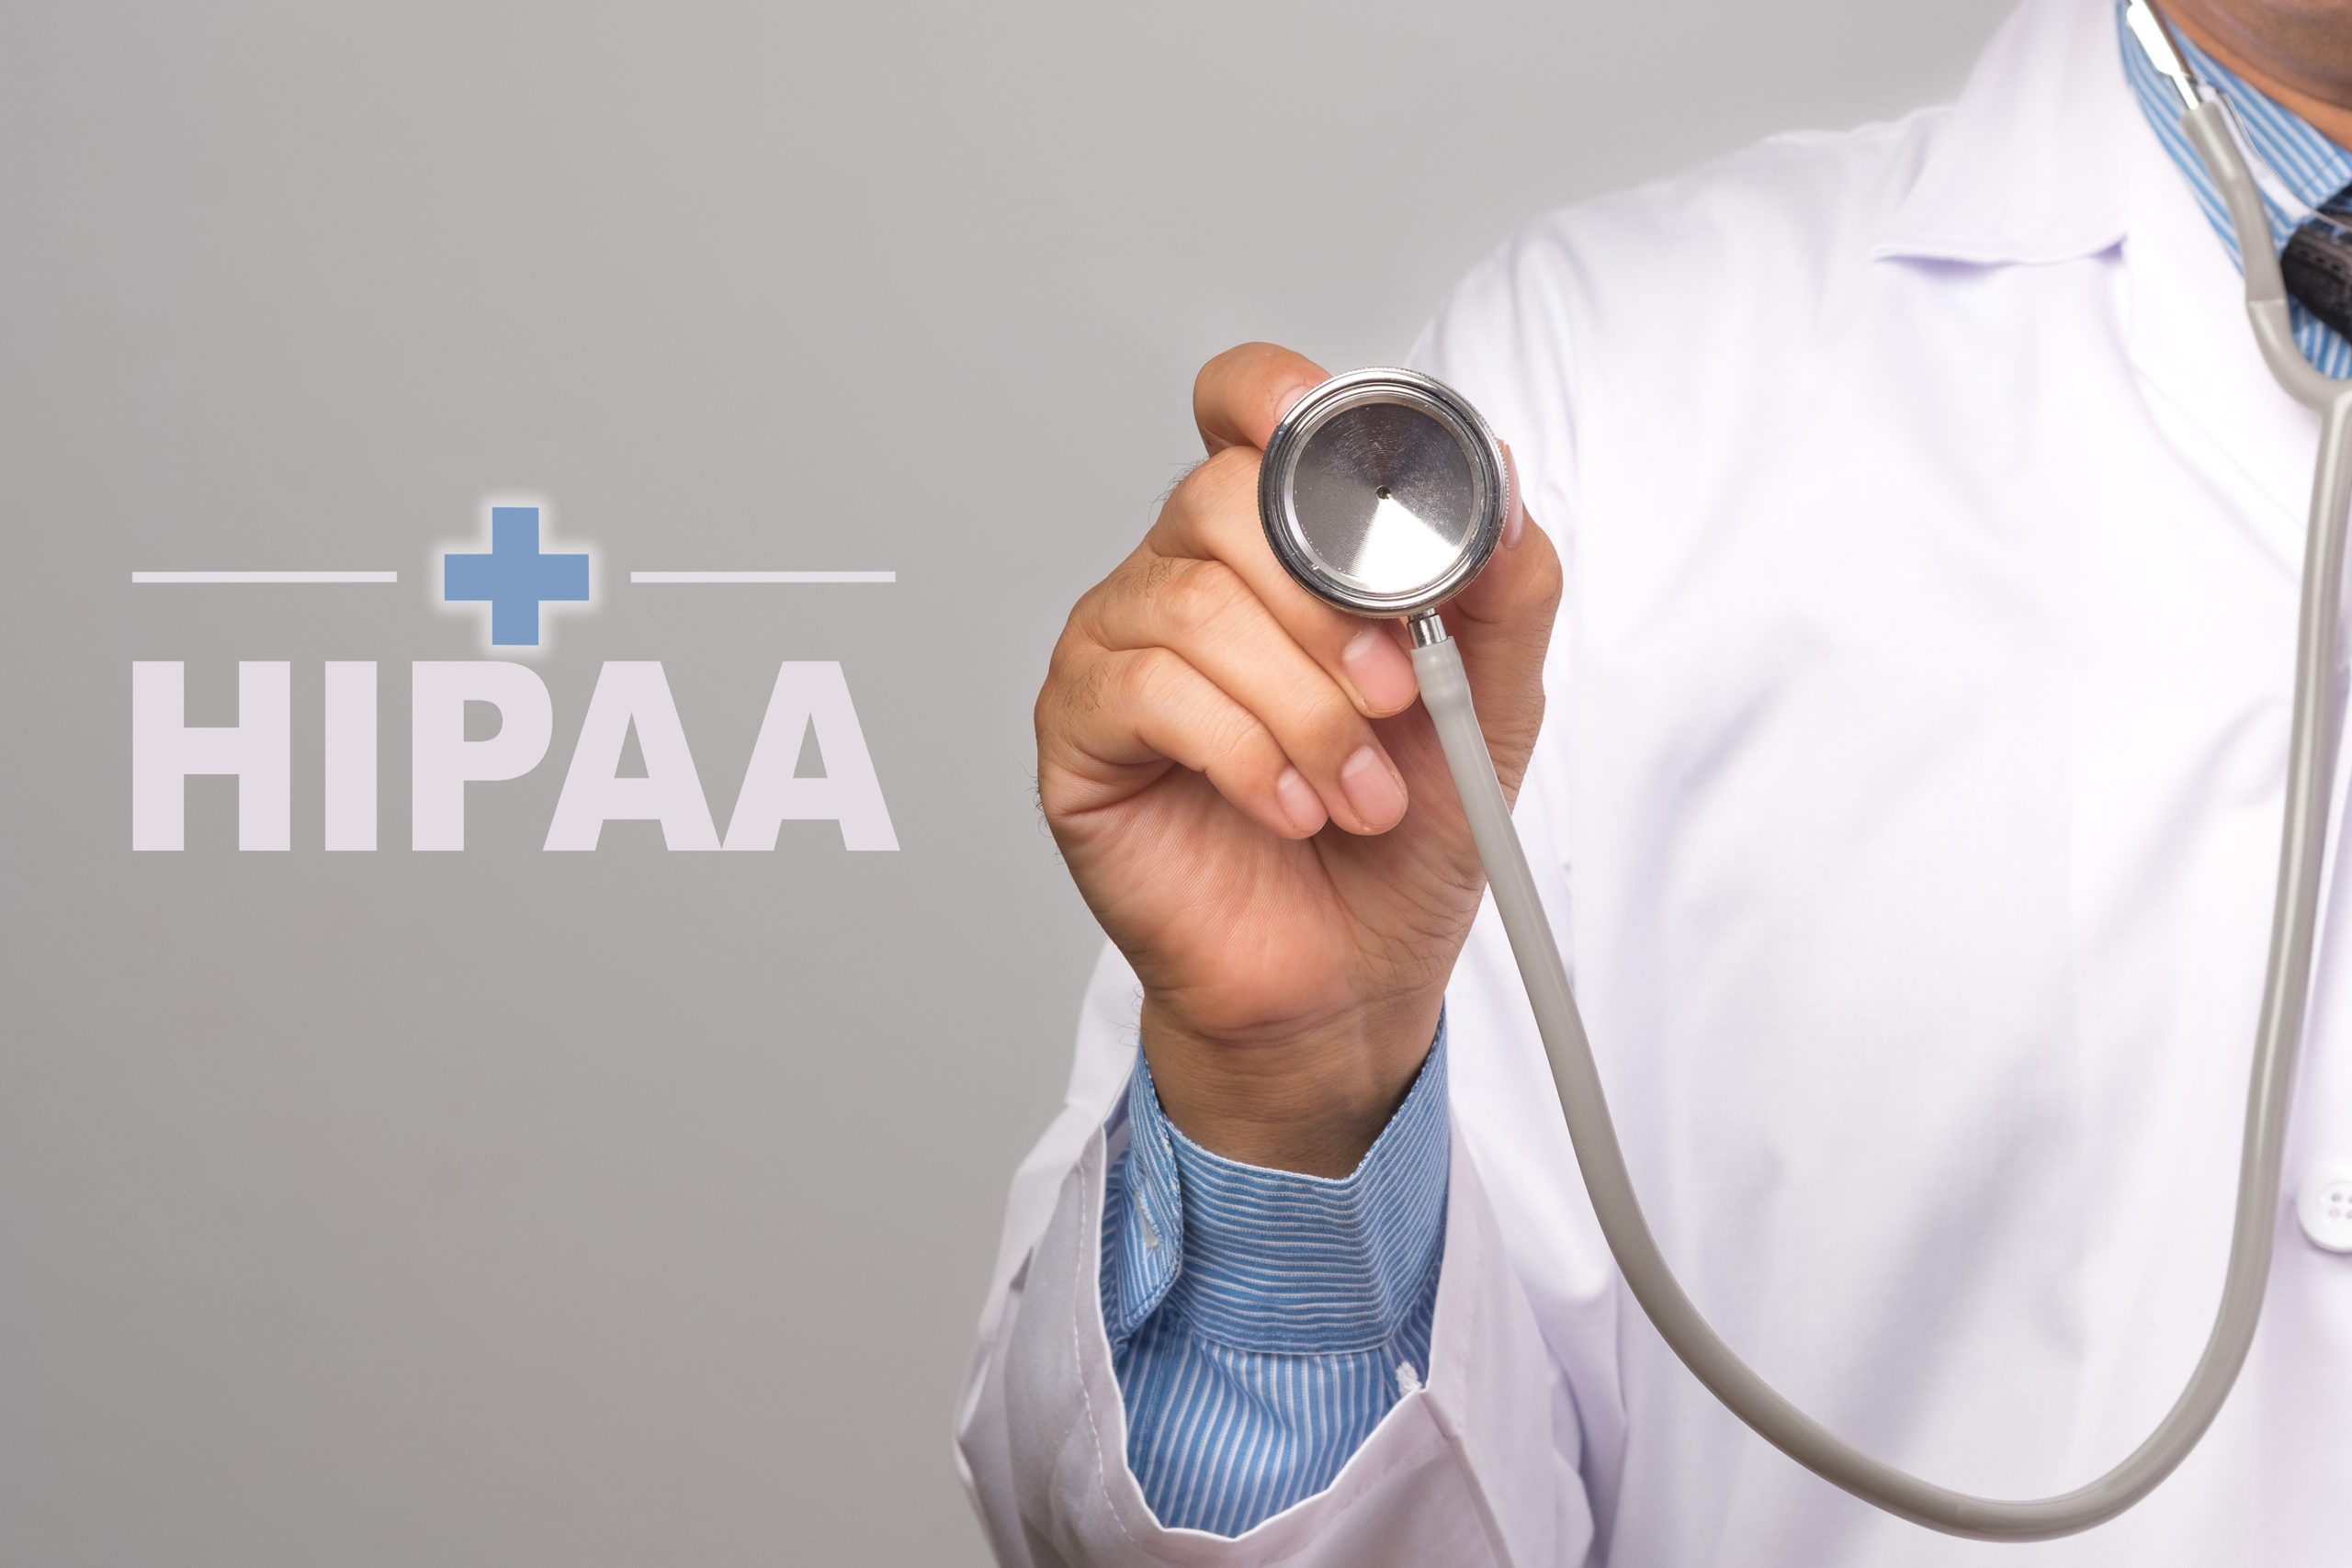 What Exactly Does It Mean to Be HIPAA Compliant?